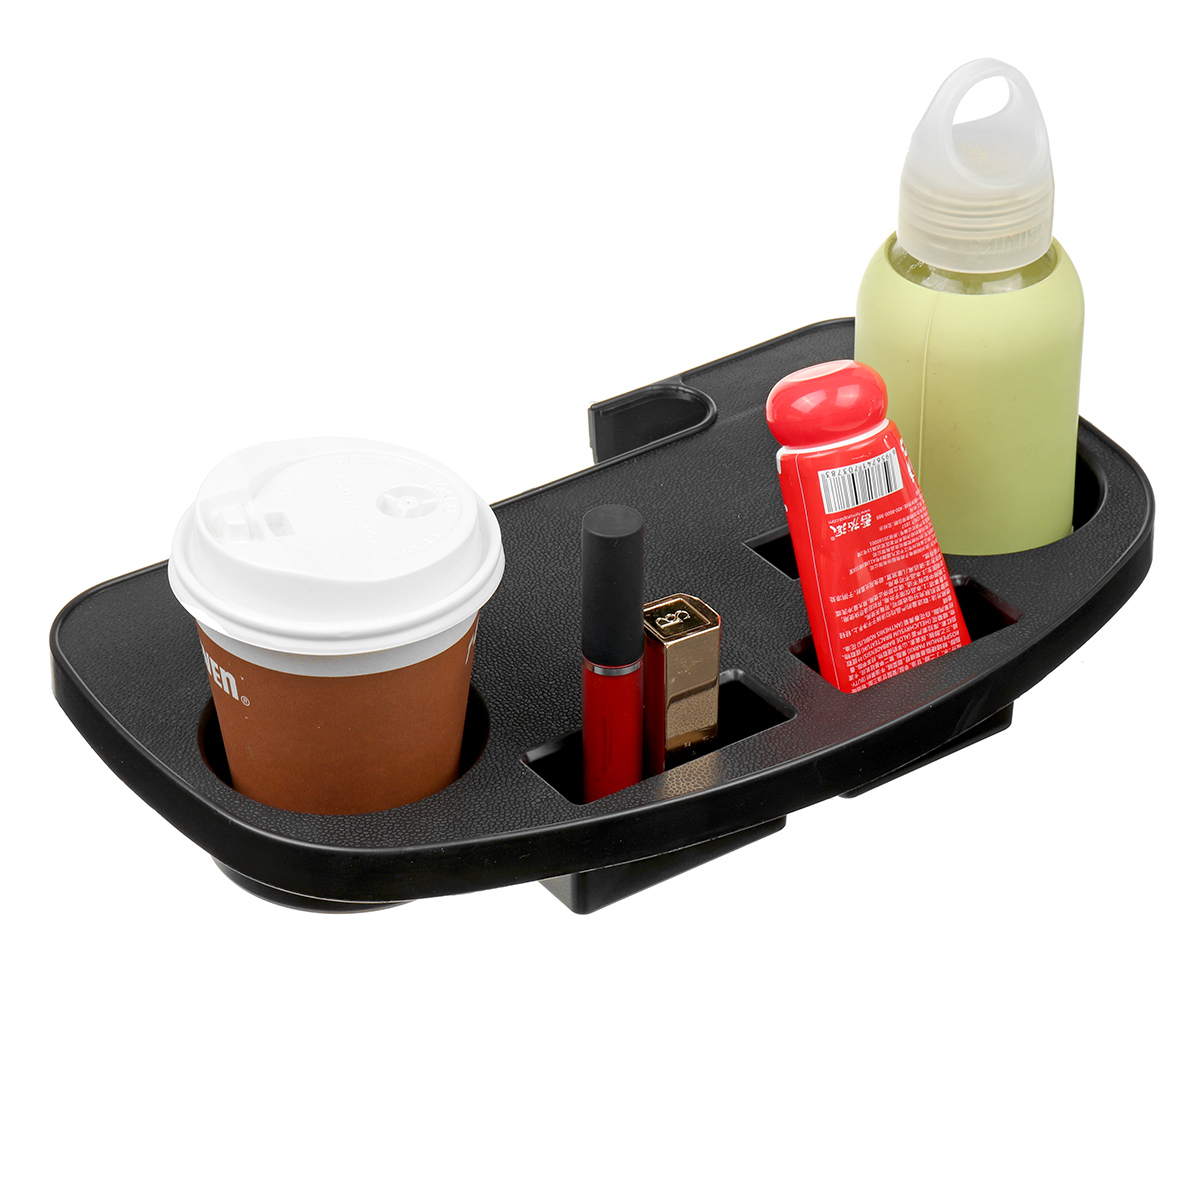 Folding-Chair-Table-Side-Tray-Multi-functional-Drink-Cup-Water-Bottle-Holder-Phone-Rack-1694964-10